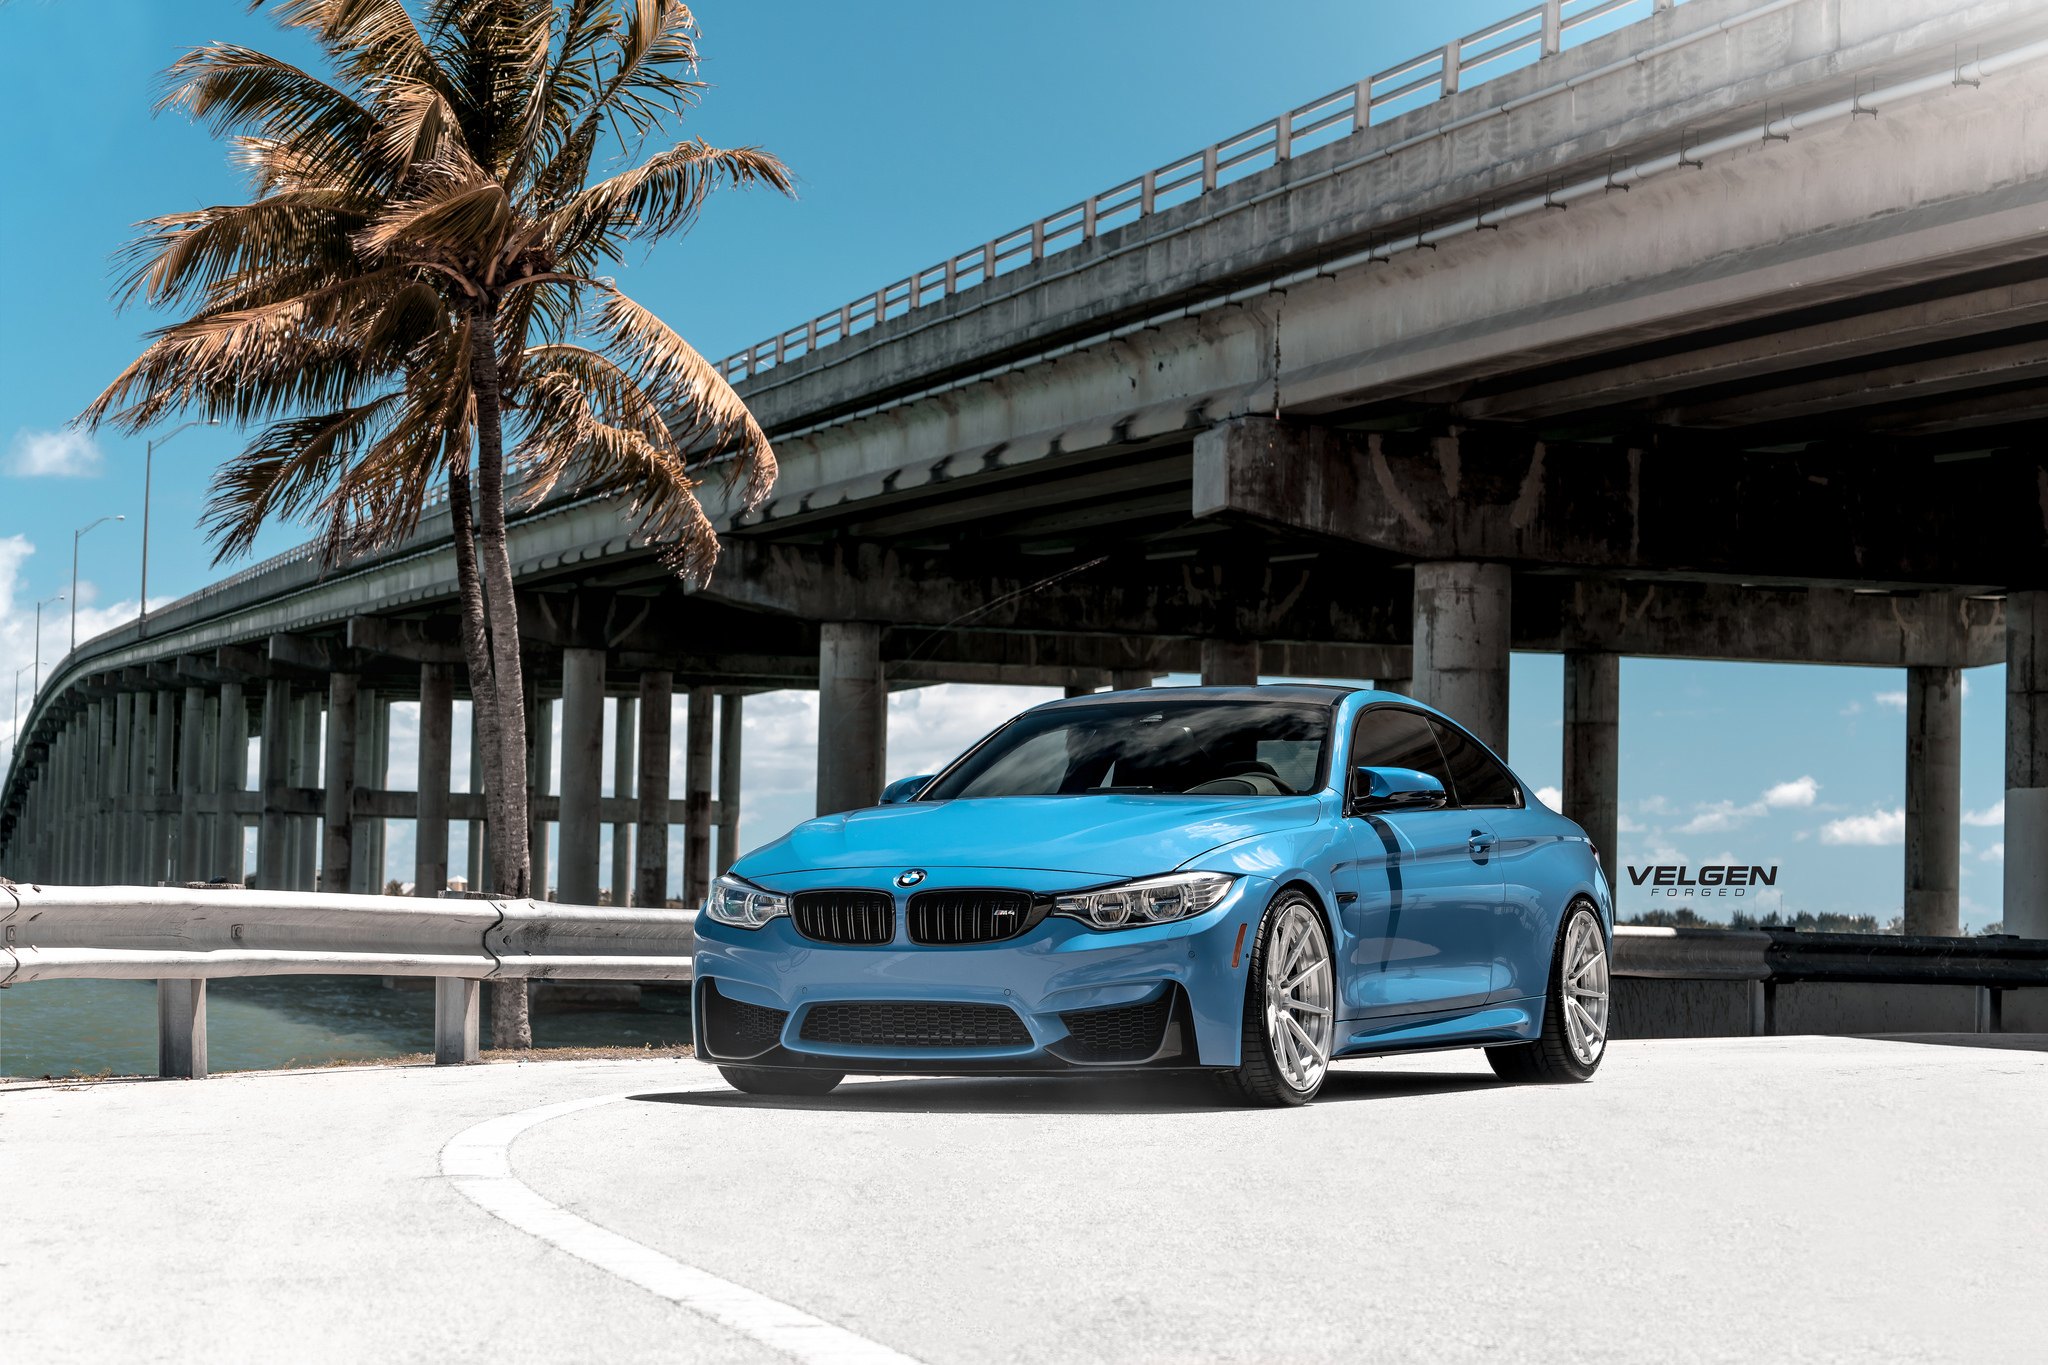 Laguna Seca Blue Bmw M4 Coupe Fitted With Velgen Forged Rims — Carid.Com  Gallery